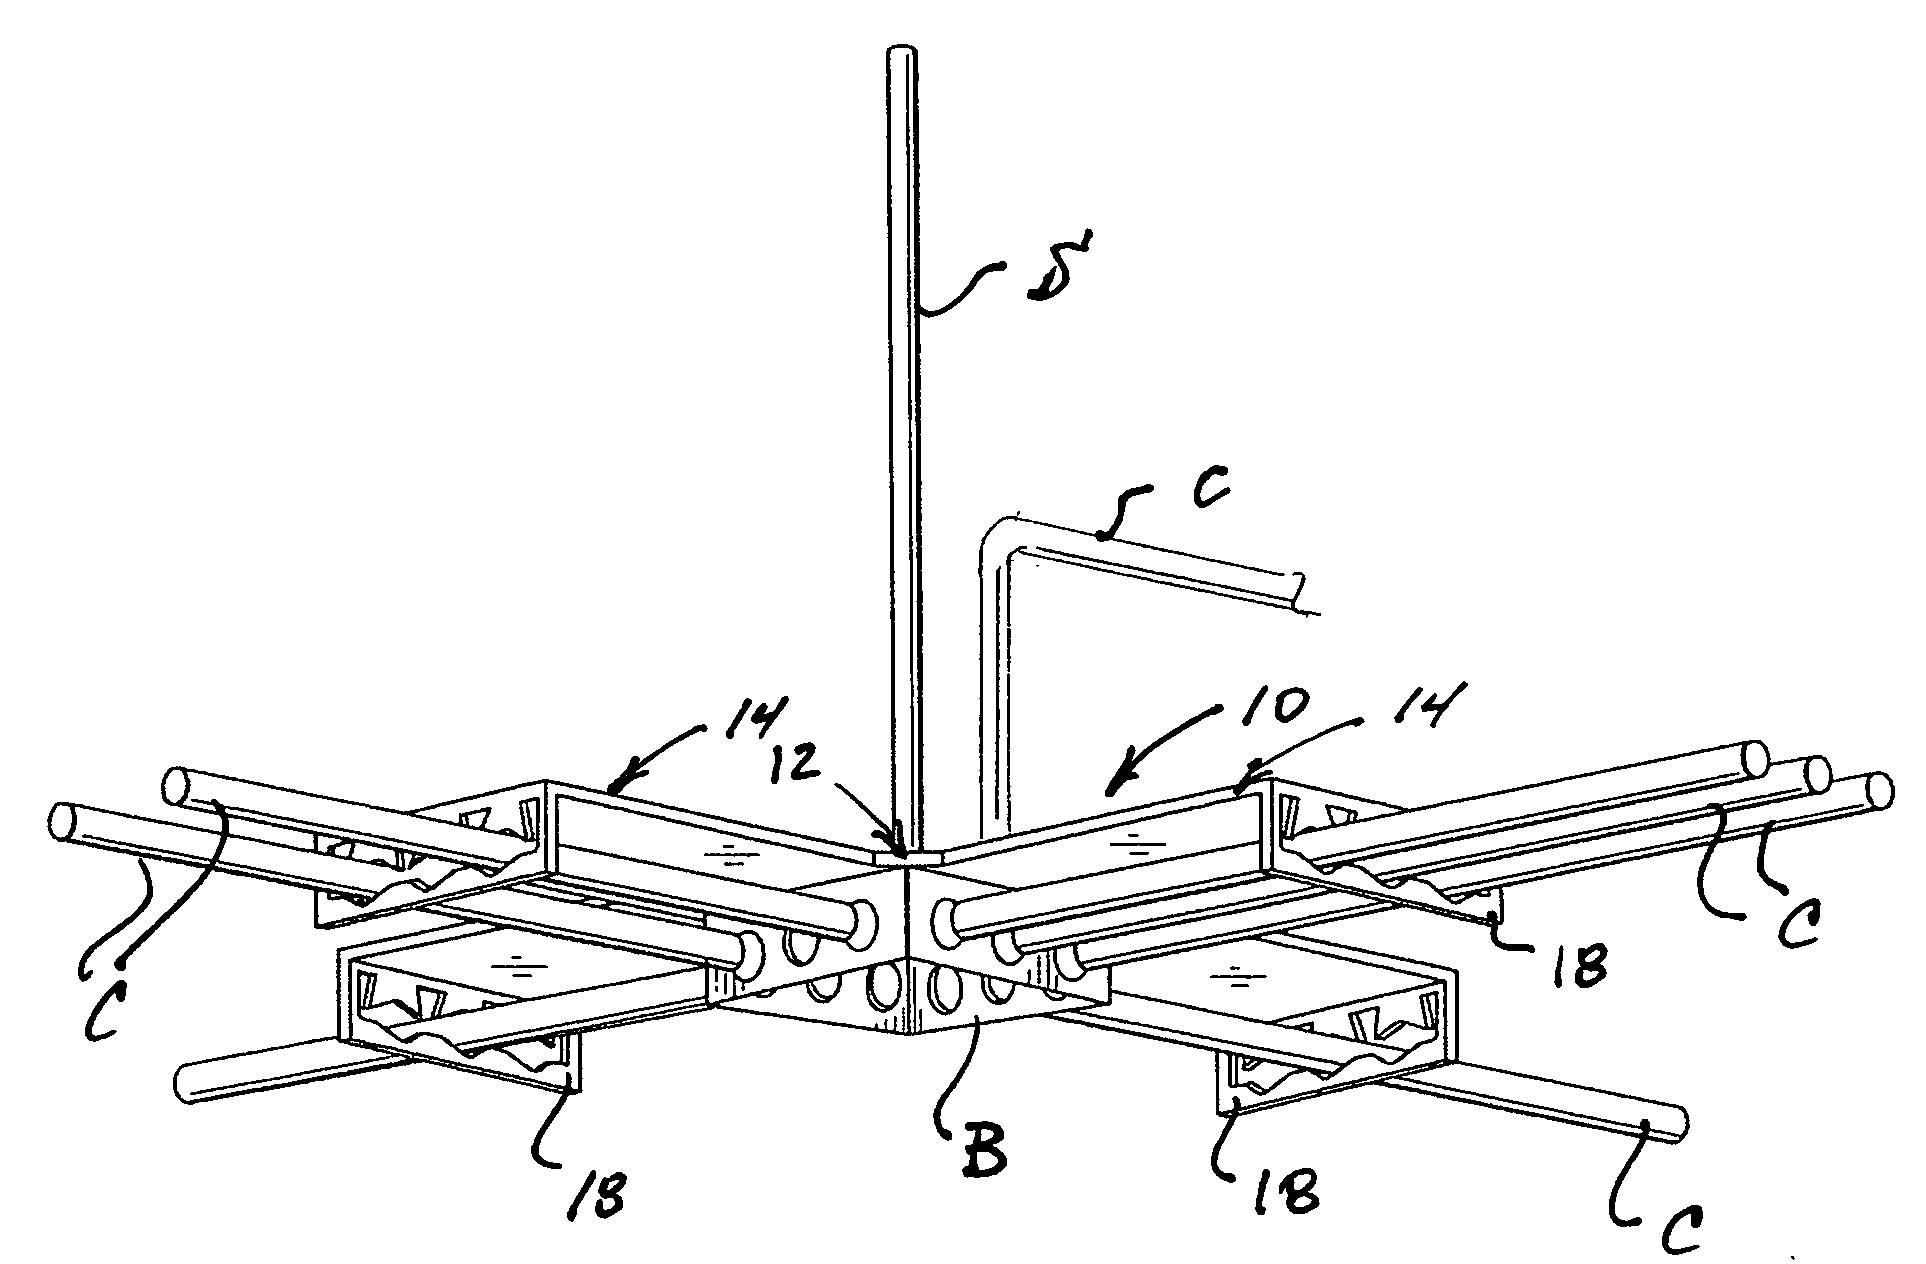 Support bracket for electrical box